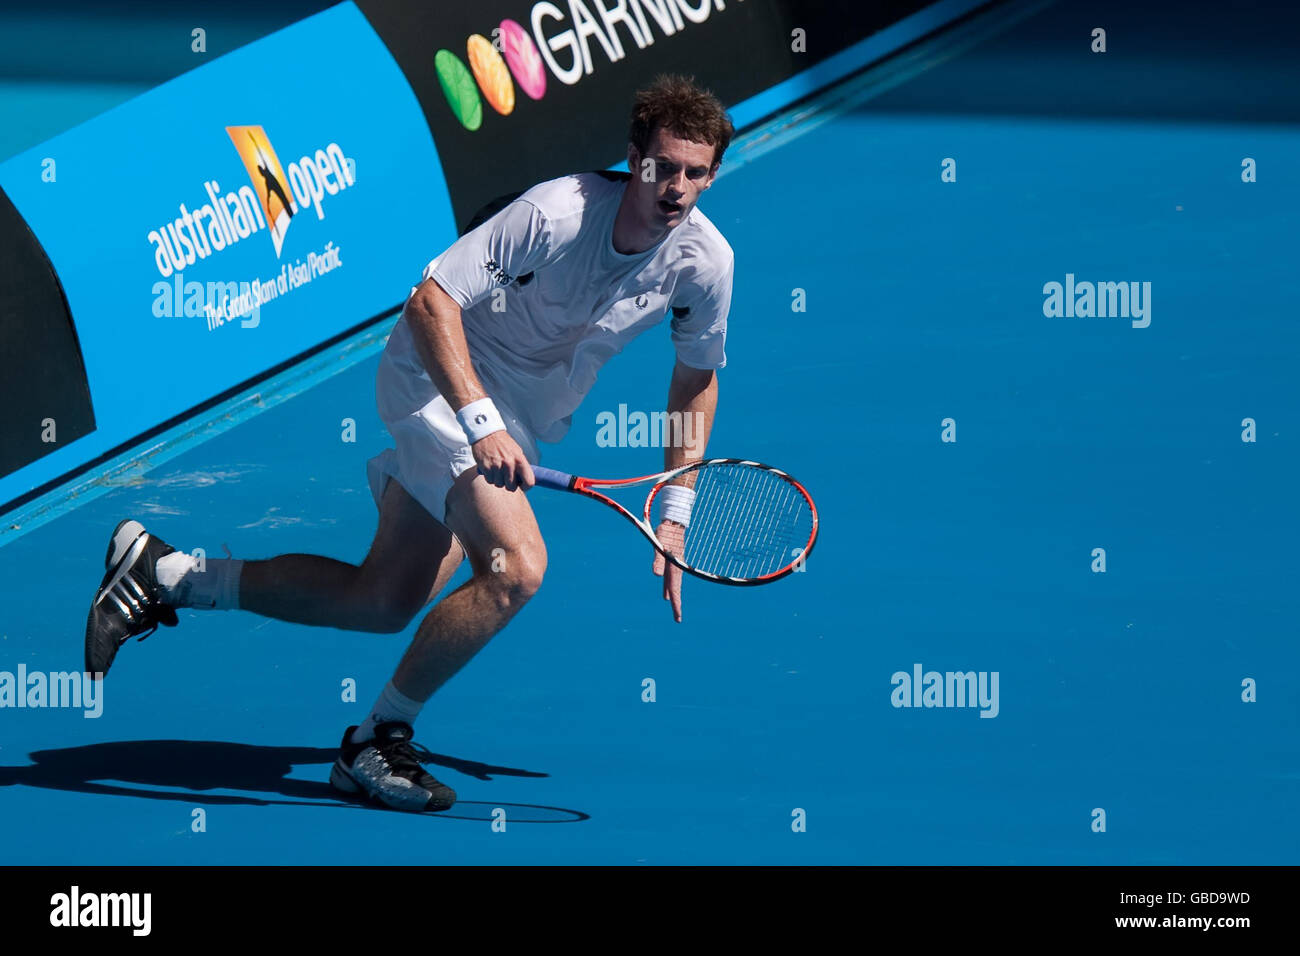 Great Britain's Andy Murray in action against Spain's Fernando Verdasco during the Australian Open 2009 at Melbourne Park, Melbourne, Australia. Stock Photo